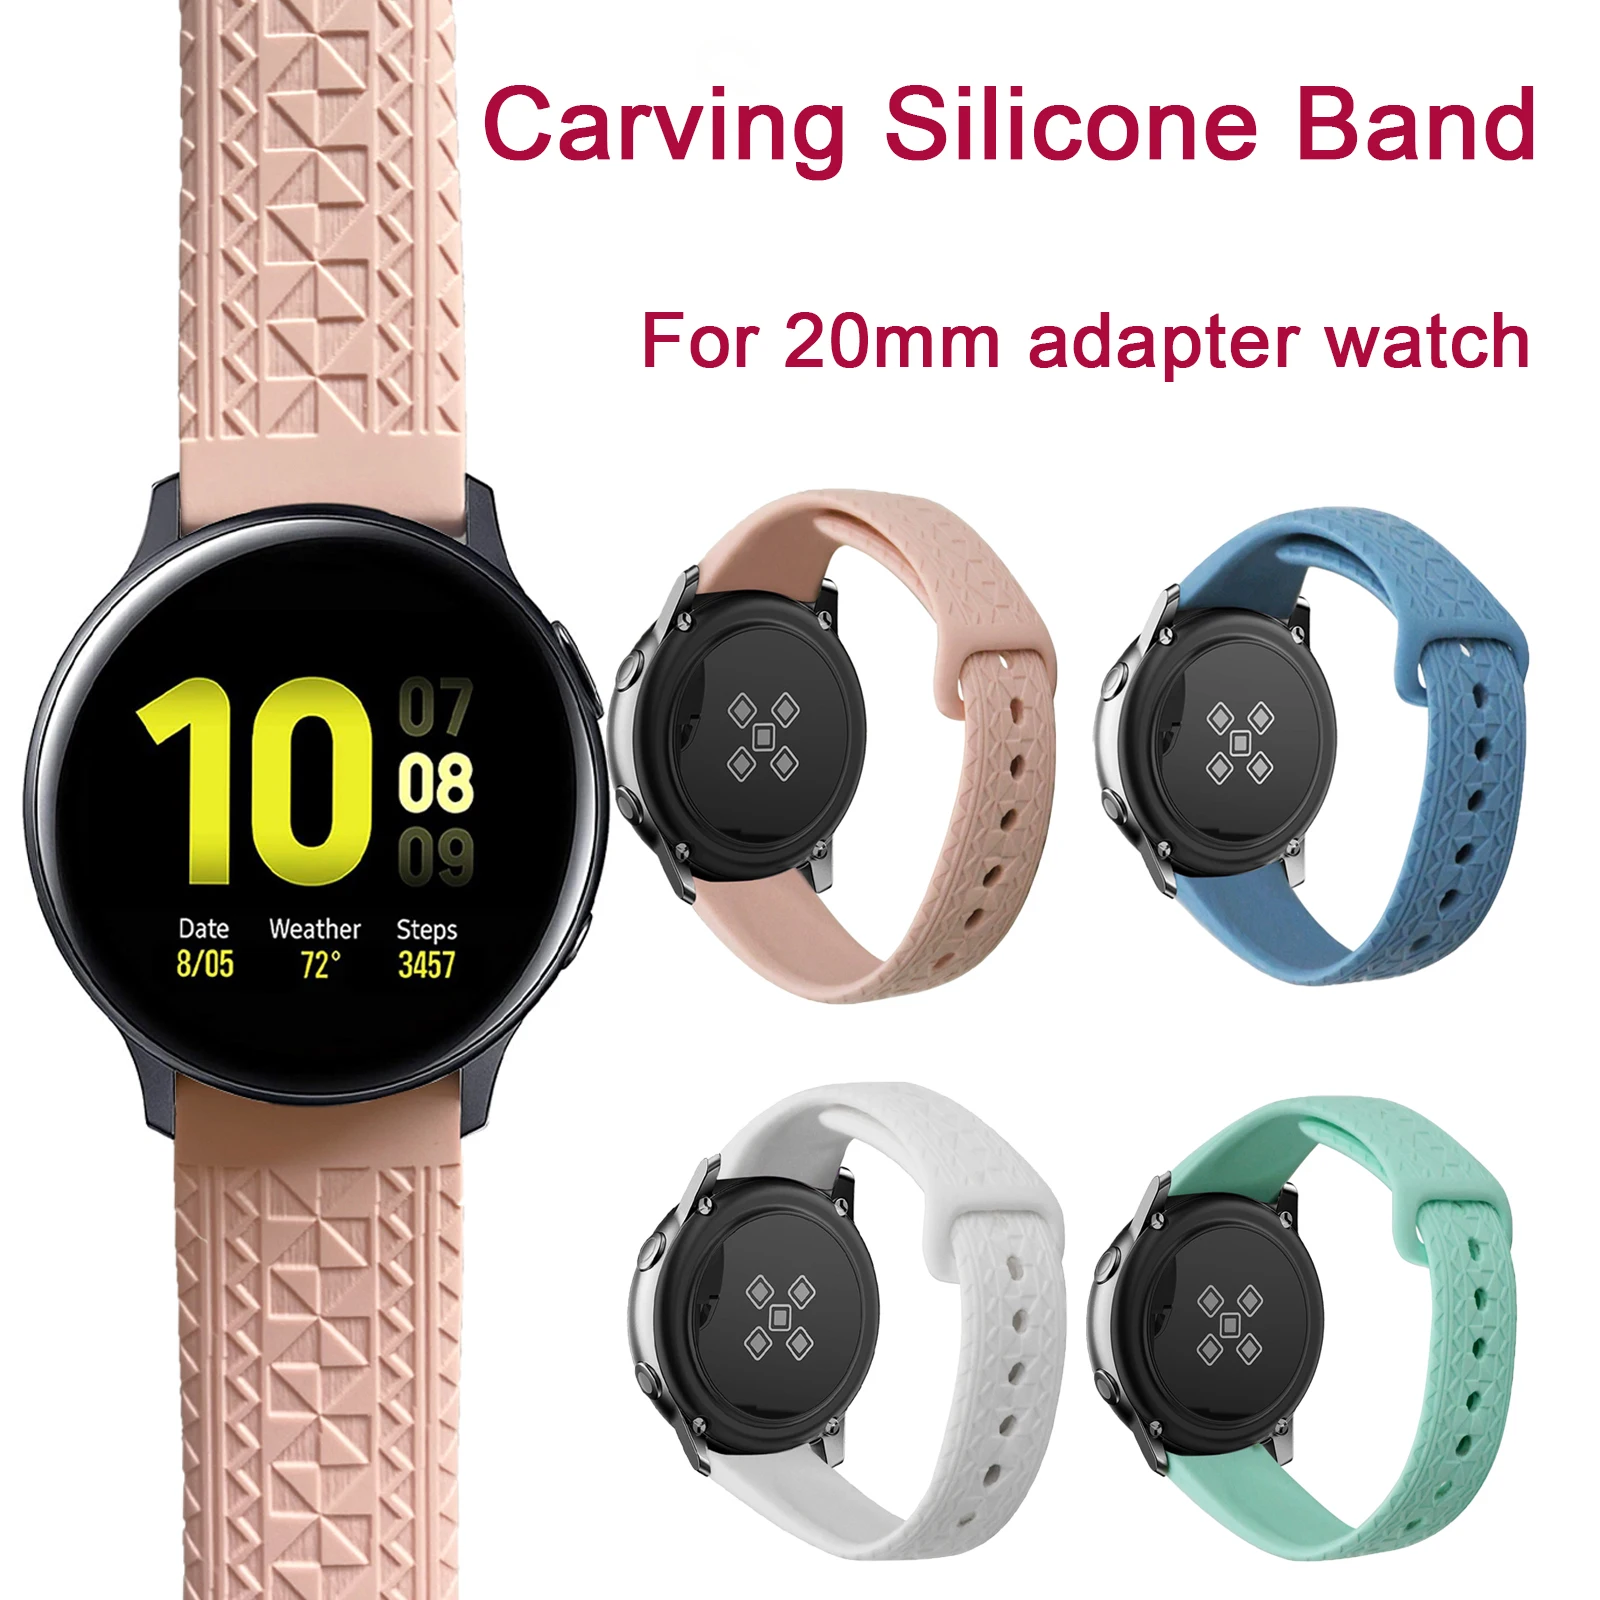 Sculpture Silicone band for Samsung Galaxy Watch Active 2 40mm 42mm Gear S2 Huami Amazfit Bracelet 20mm Sport Rubber Strap